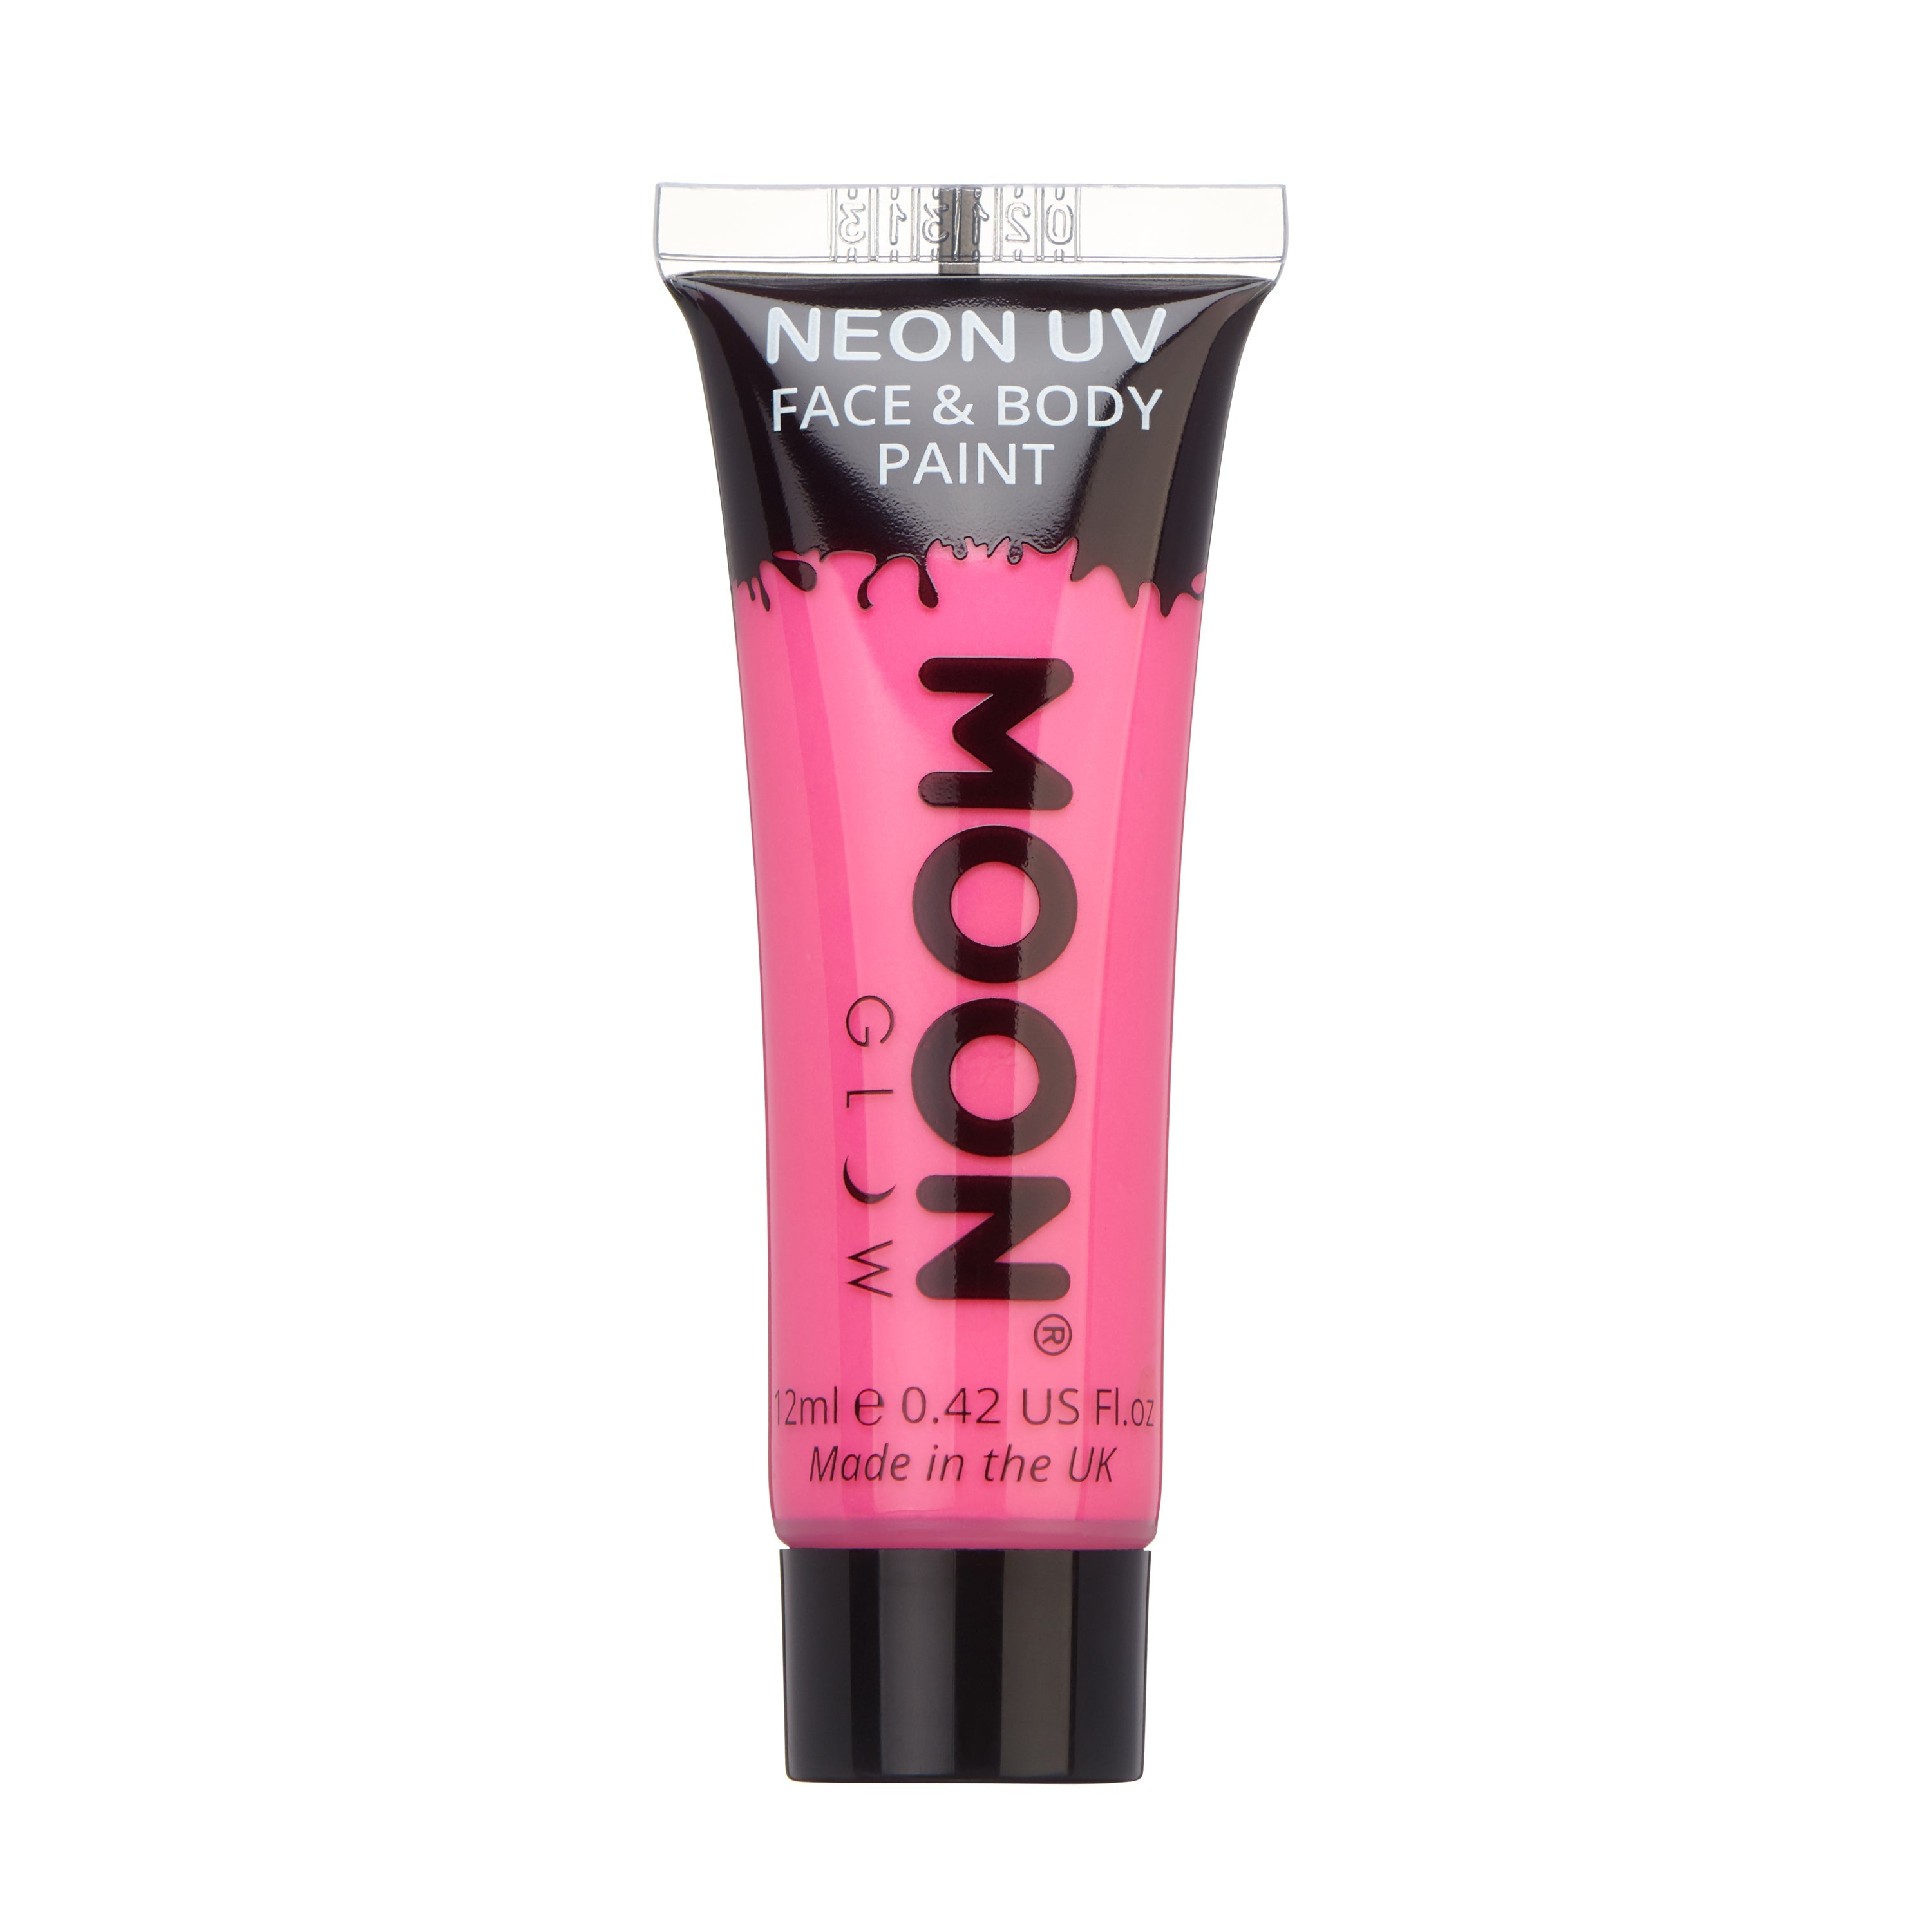 Neon UV Glow Blacklight Face & Body Crayons by Moon Glow